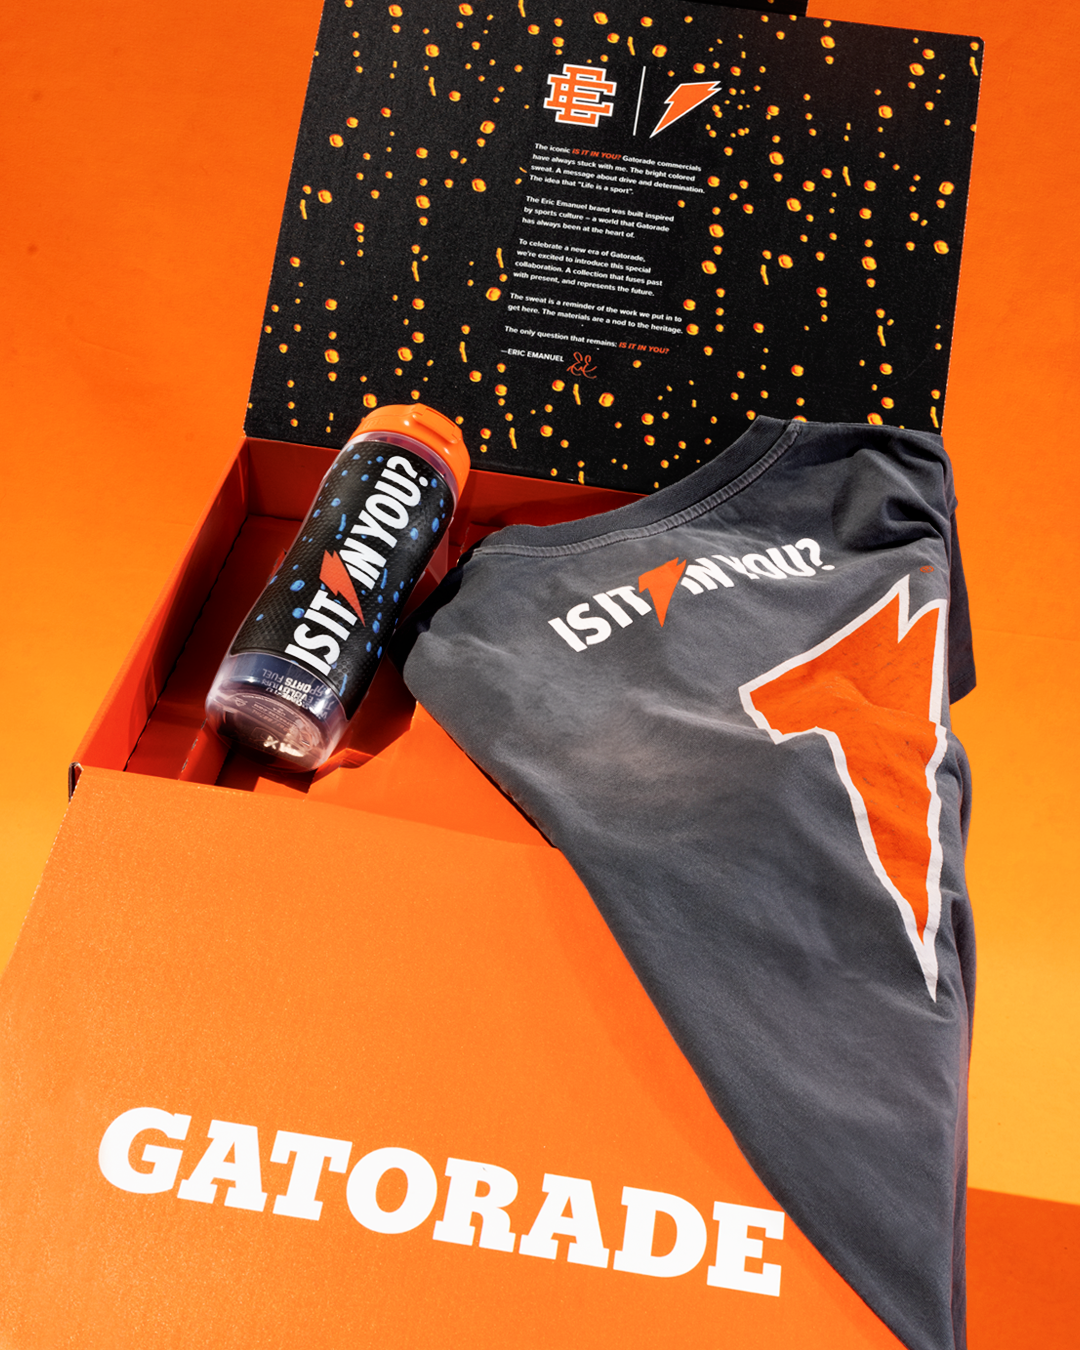 Gatorade-branded box containing a gray shirt with an orange logo and text &quot;IS IT IN YOU?&quot;, and a sports drink bottle with &quot;GROW FAST&quot; on the label